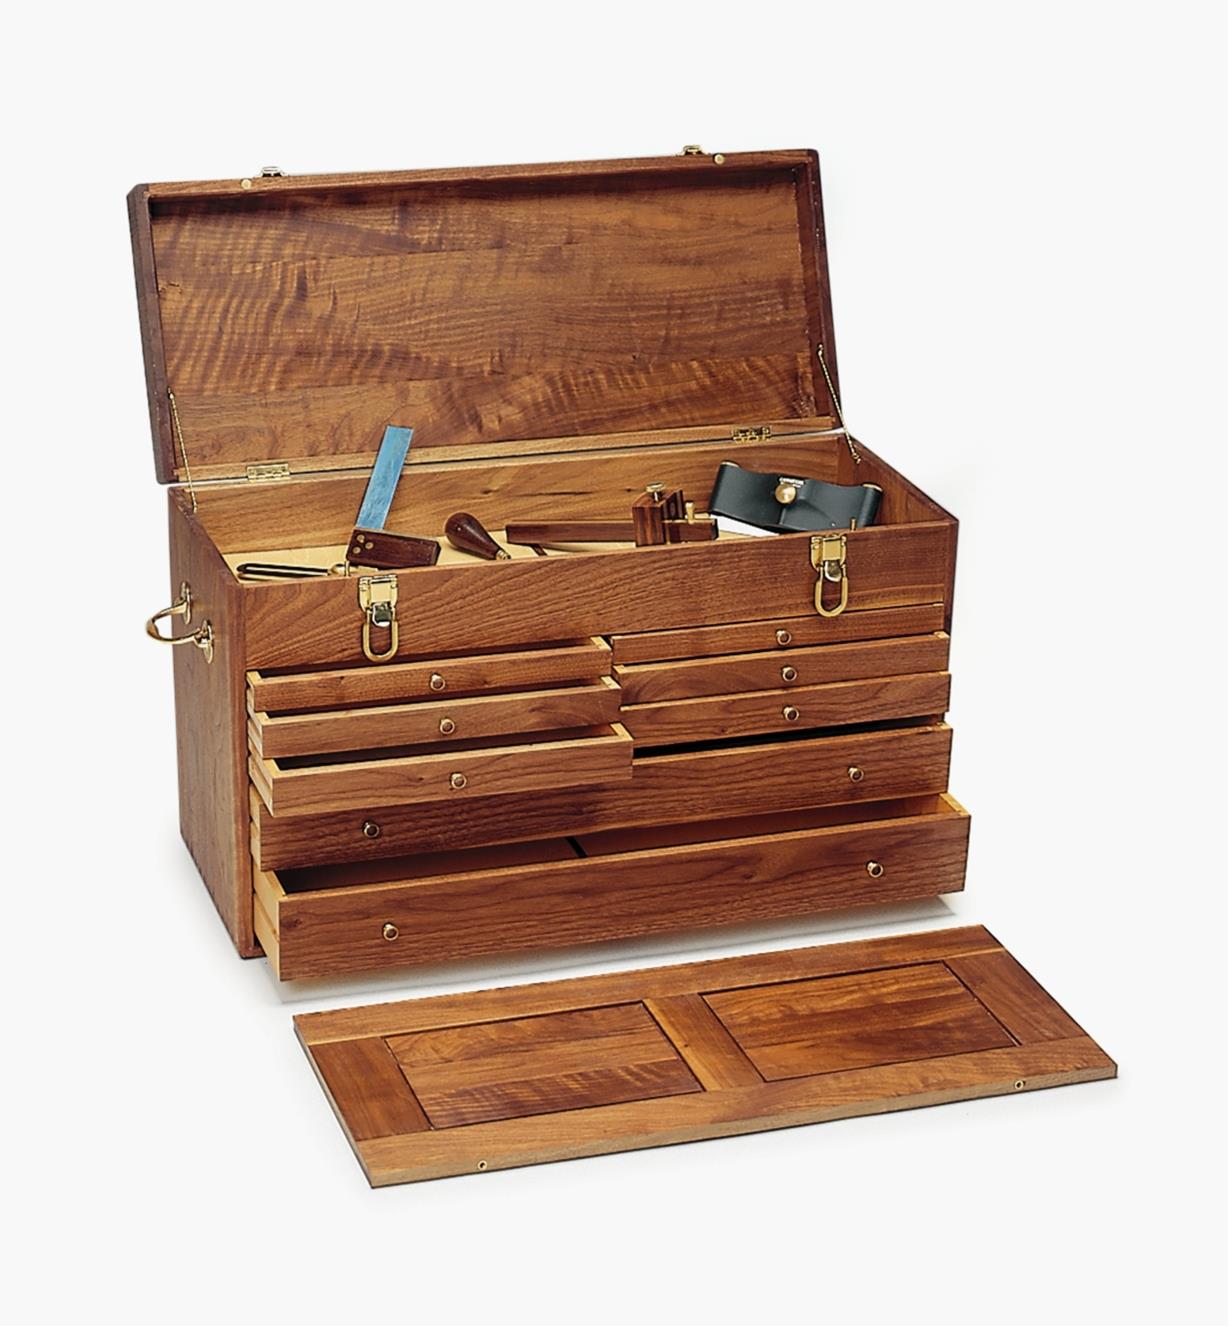 Example of completed tool chest, open